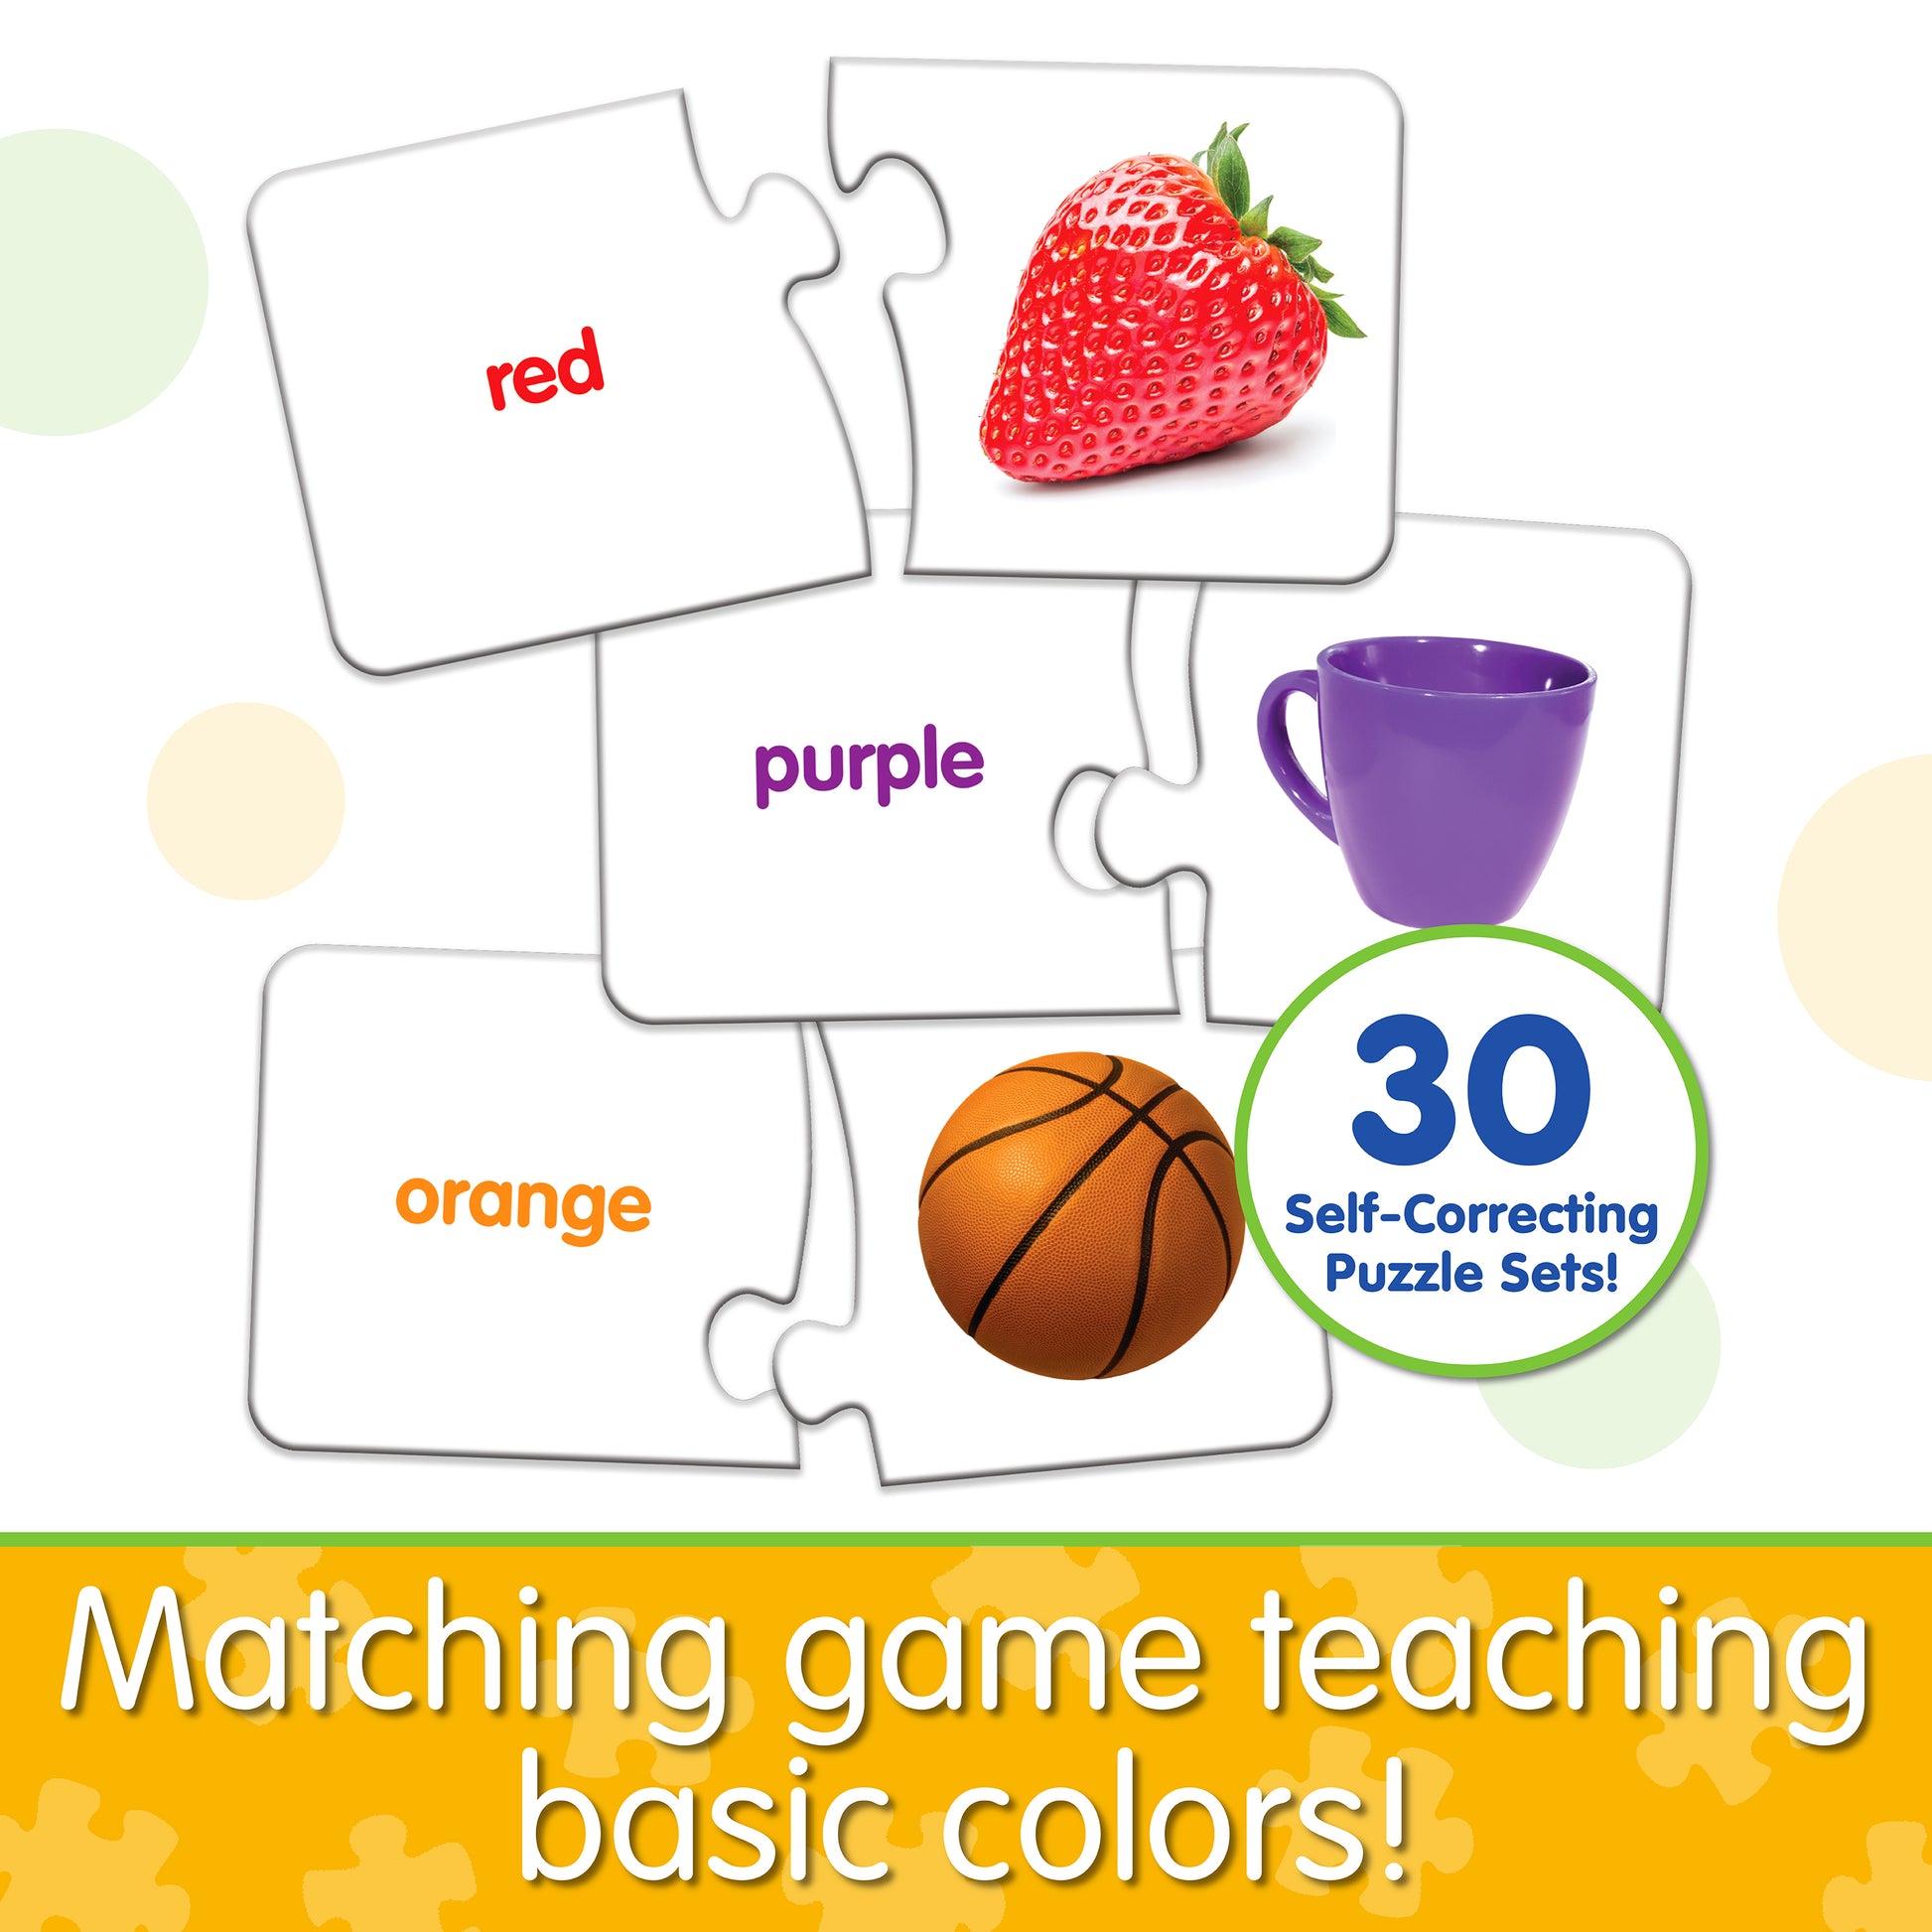 Infographic about Match It - Colors that says, "Matching game teaching basic colors!"